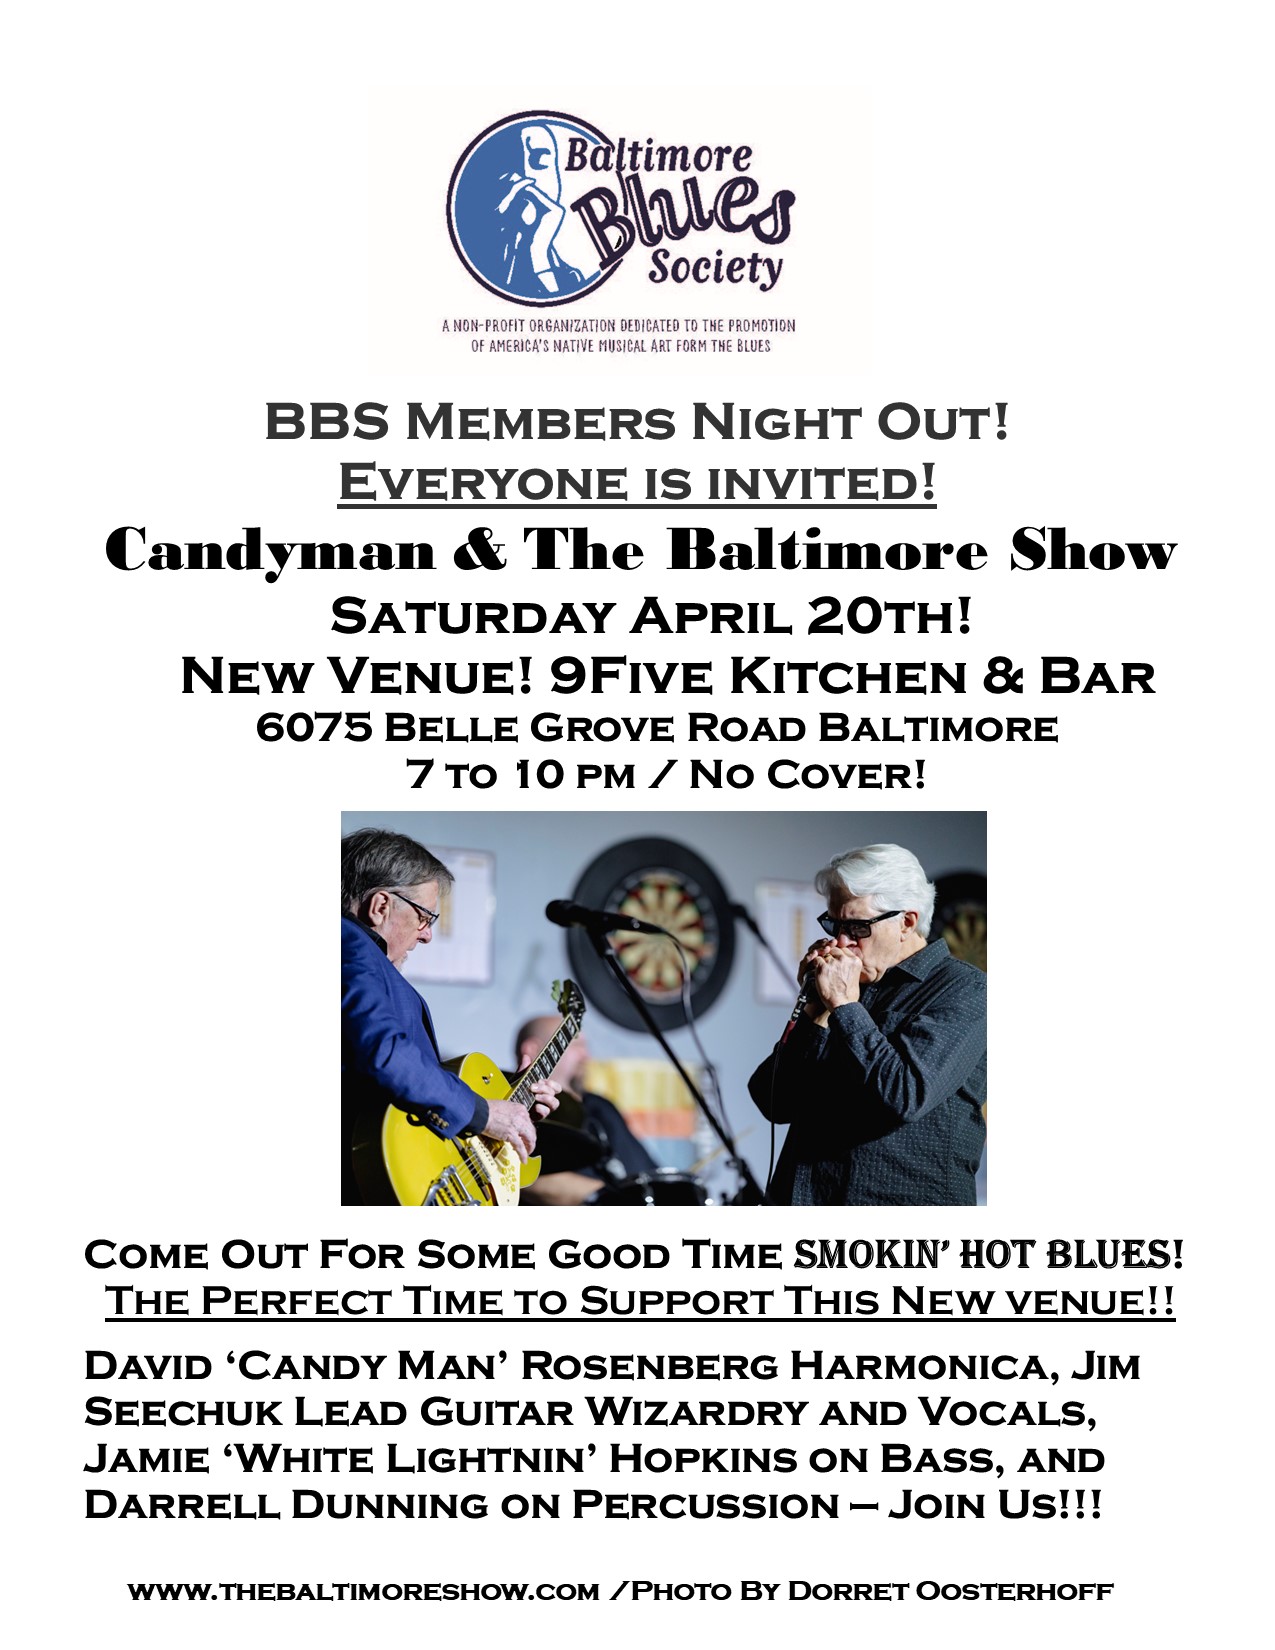 Members Night Out with Candyman & The Baltimore Show